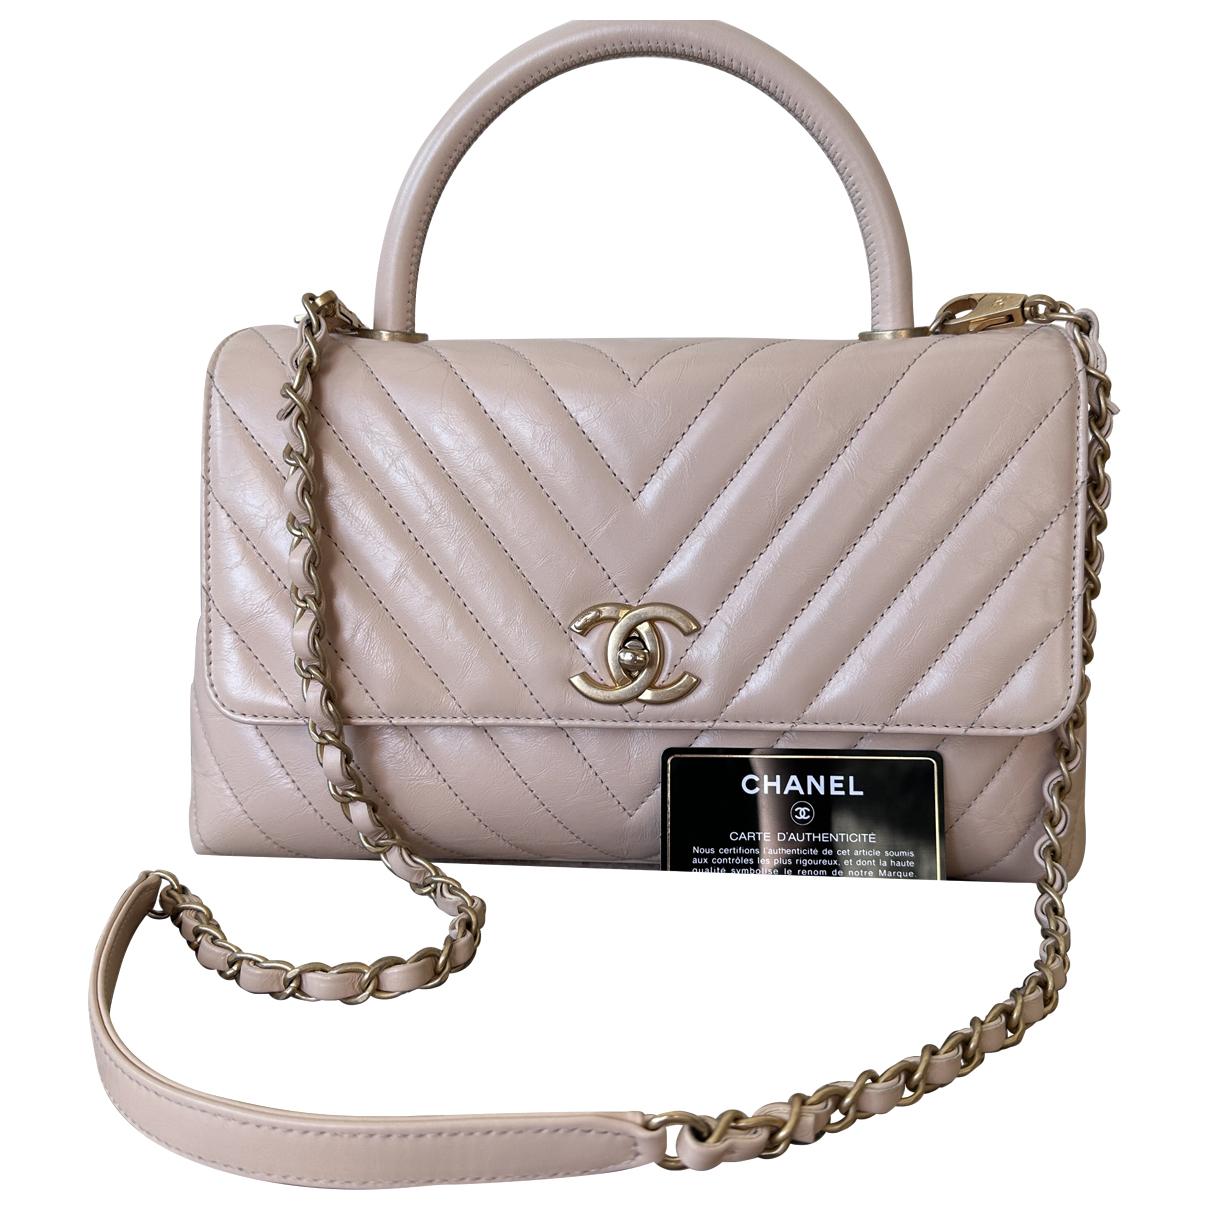 Coco handle leather handbag Chanel Beige in Leather - 32594773